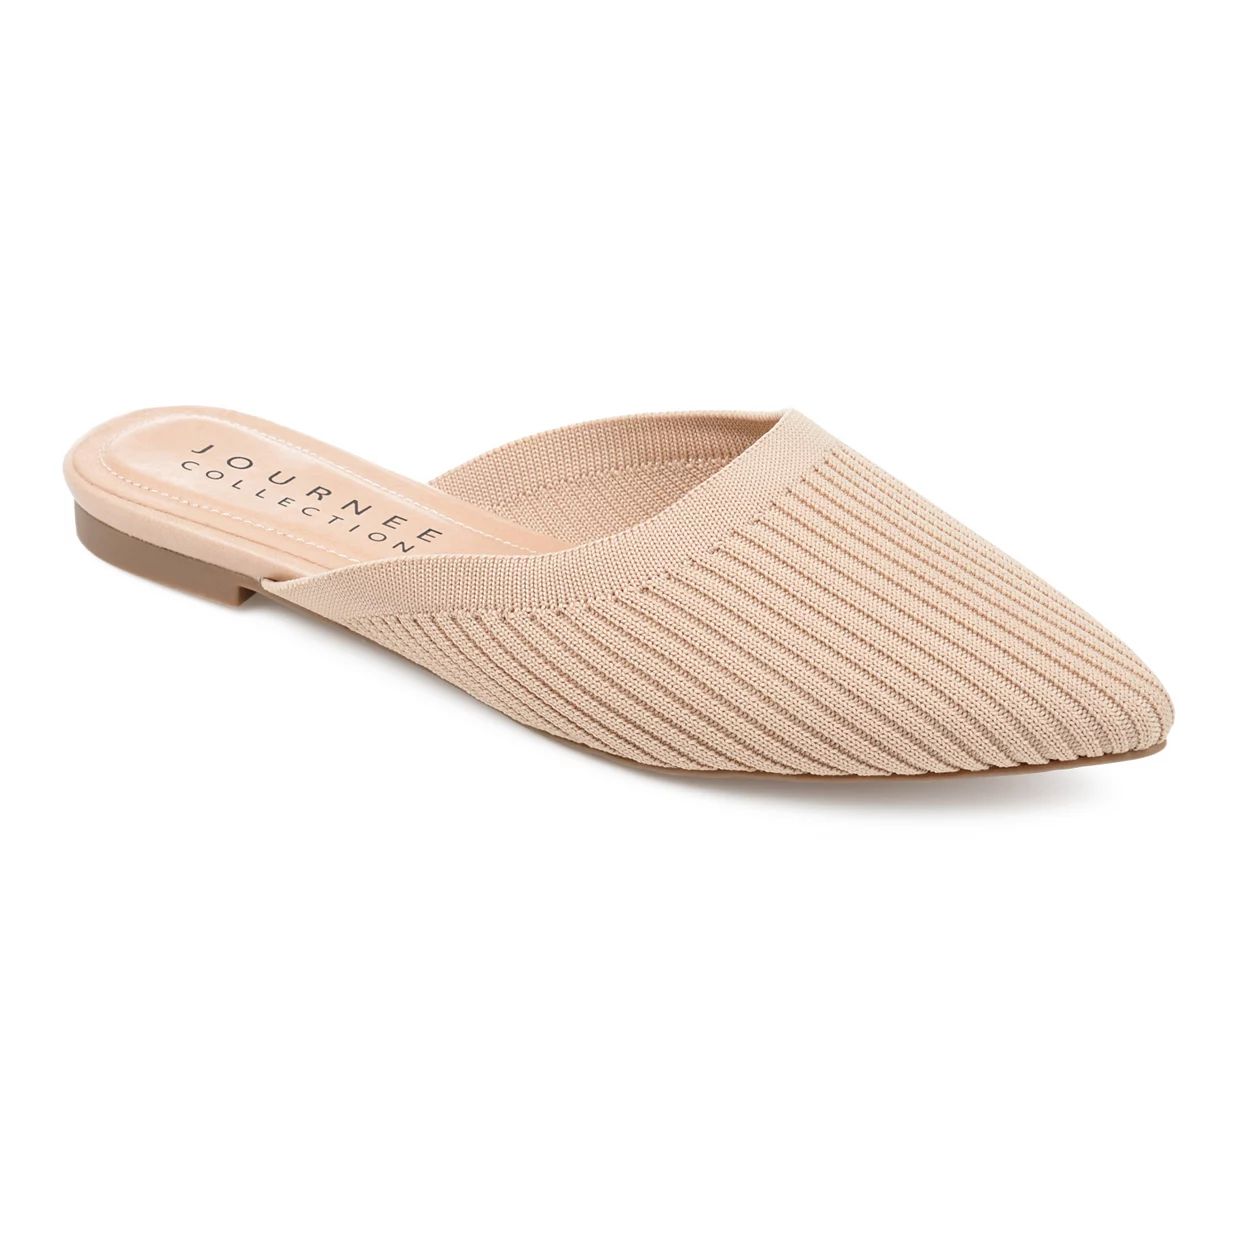 Journee Collection Aniee Women's Mules | Kohl's